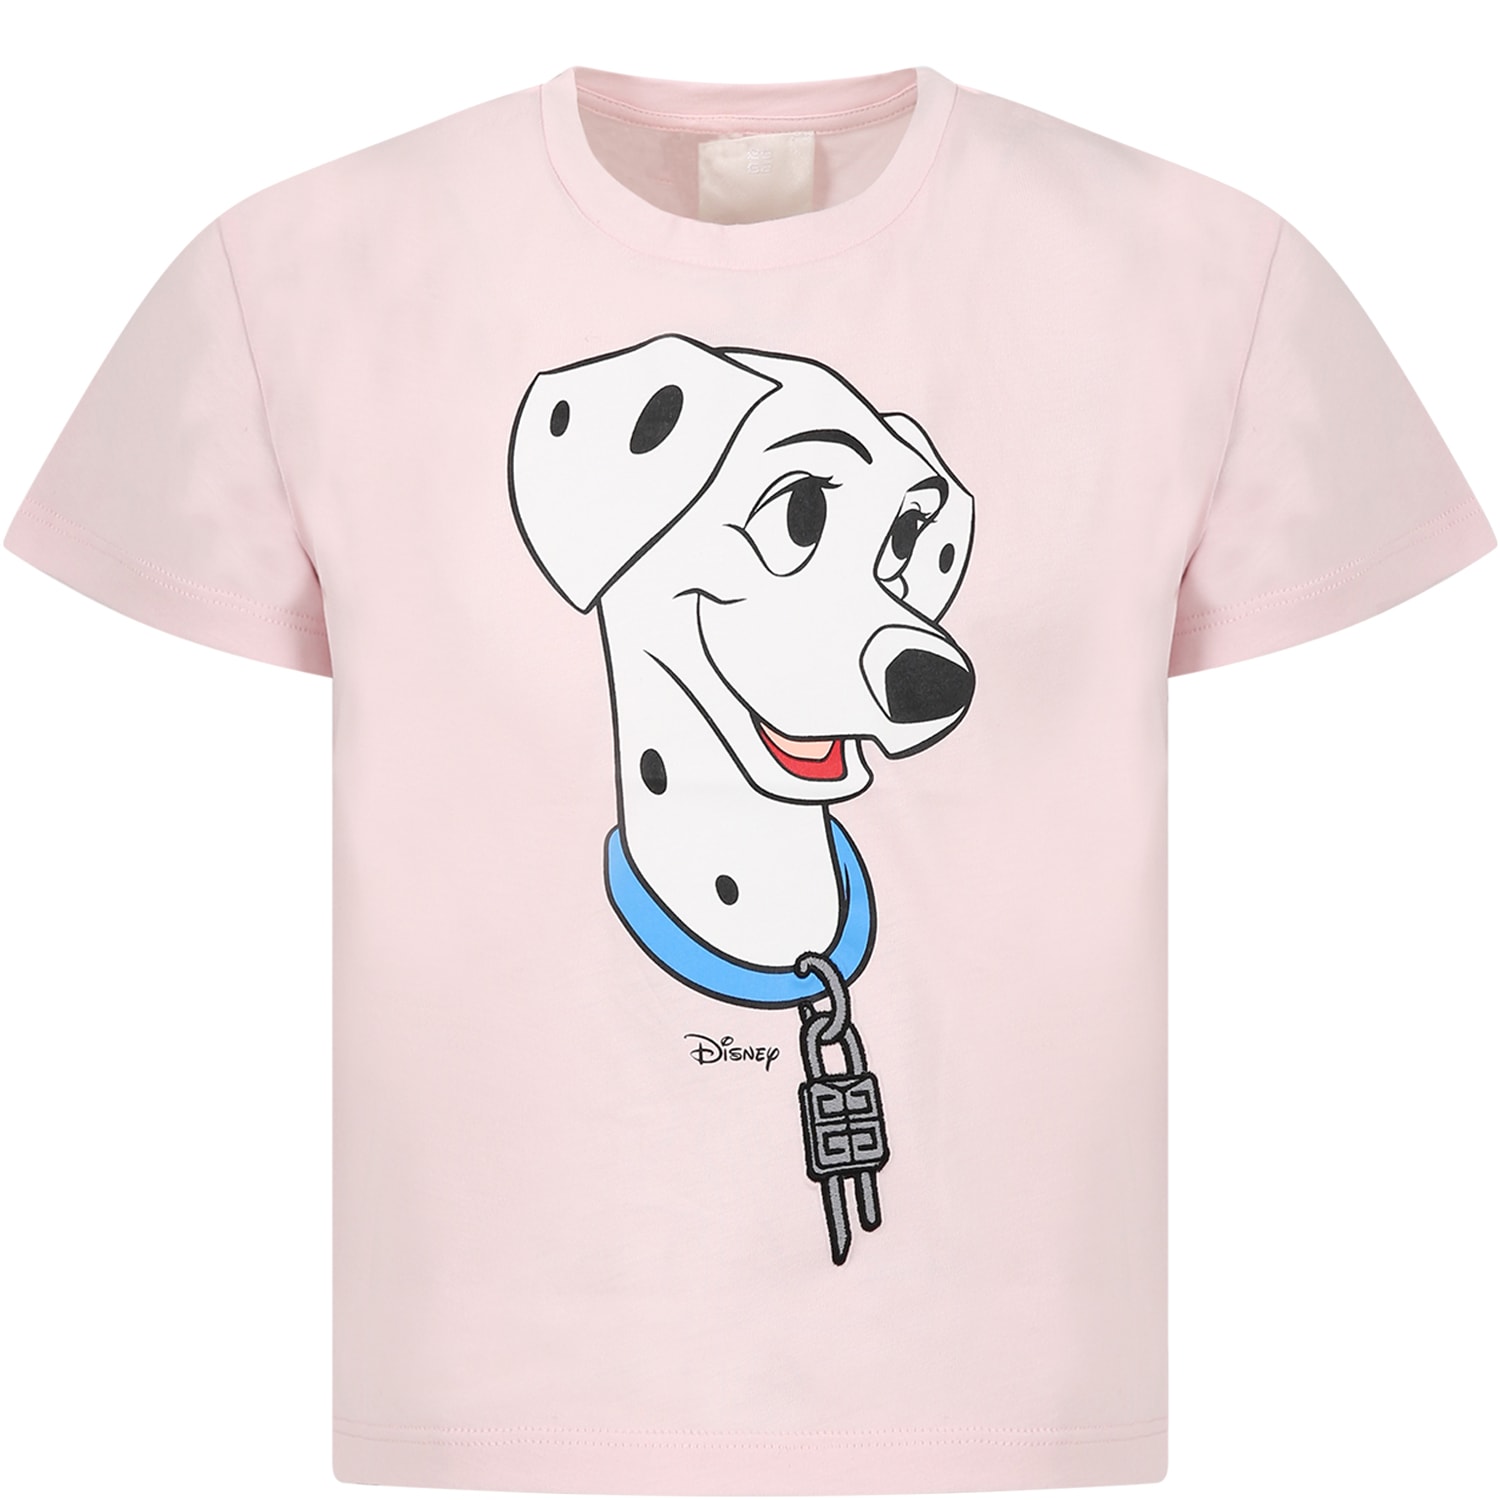 GIVENCHY PINK T-SHIRT FOR GIRL WITH 101 DALMATIANS PRINT AND LOGO